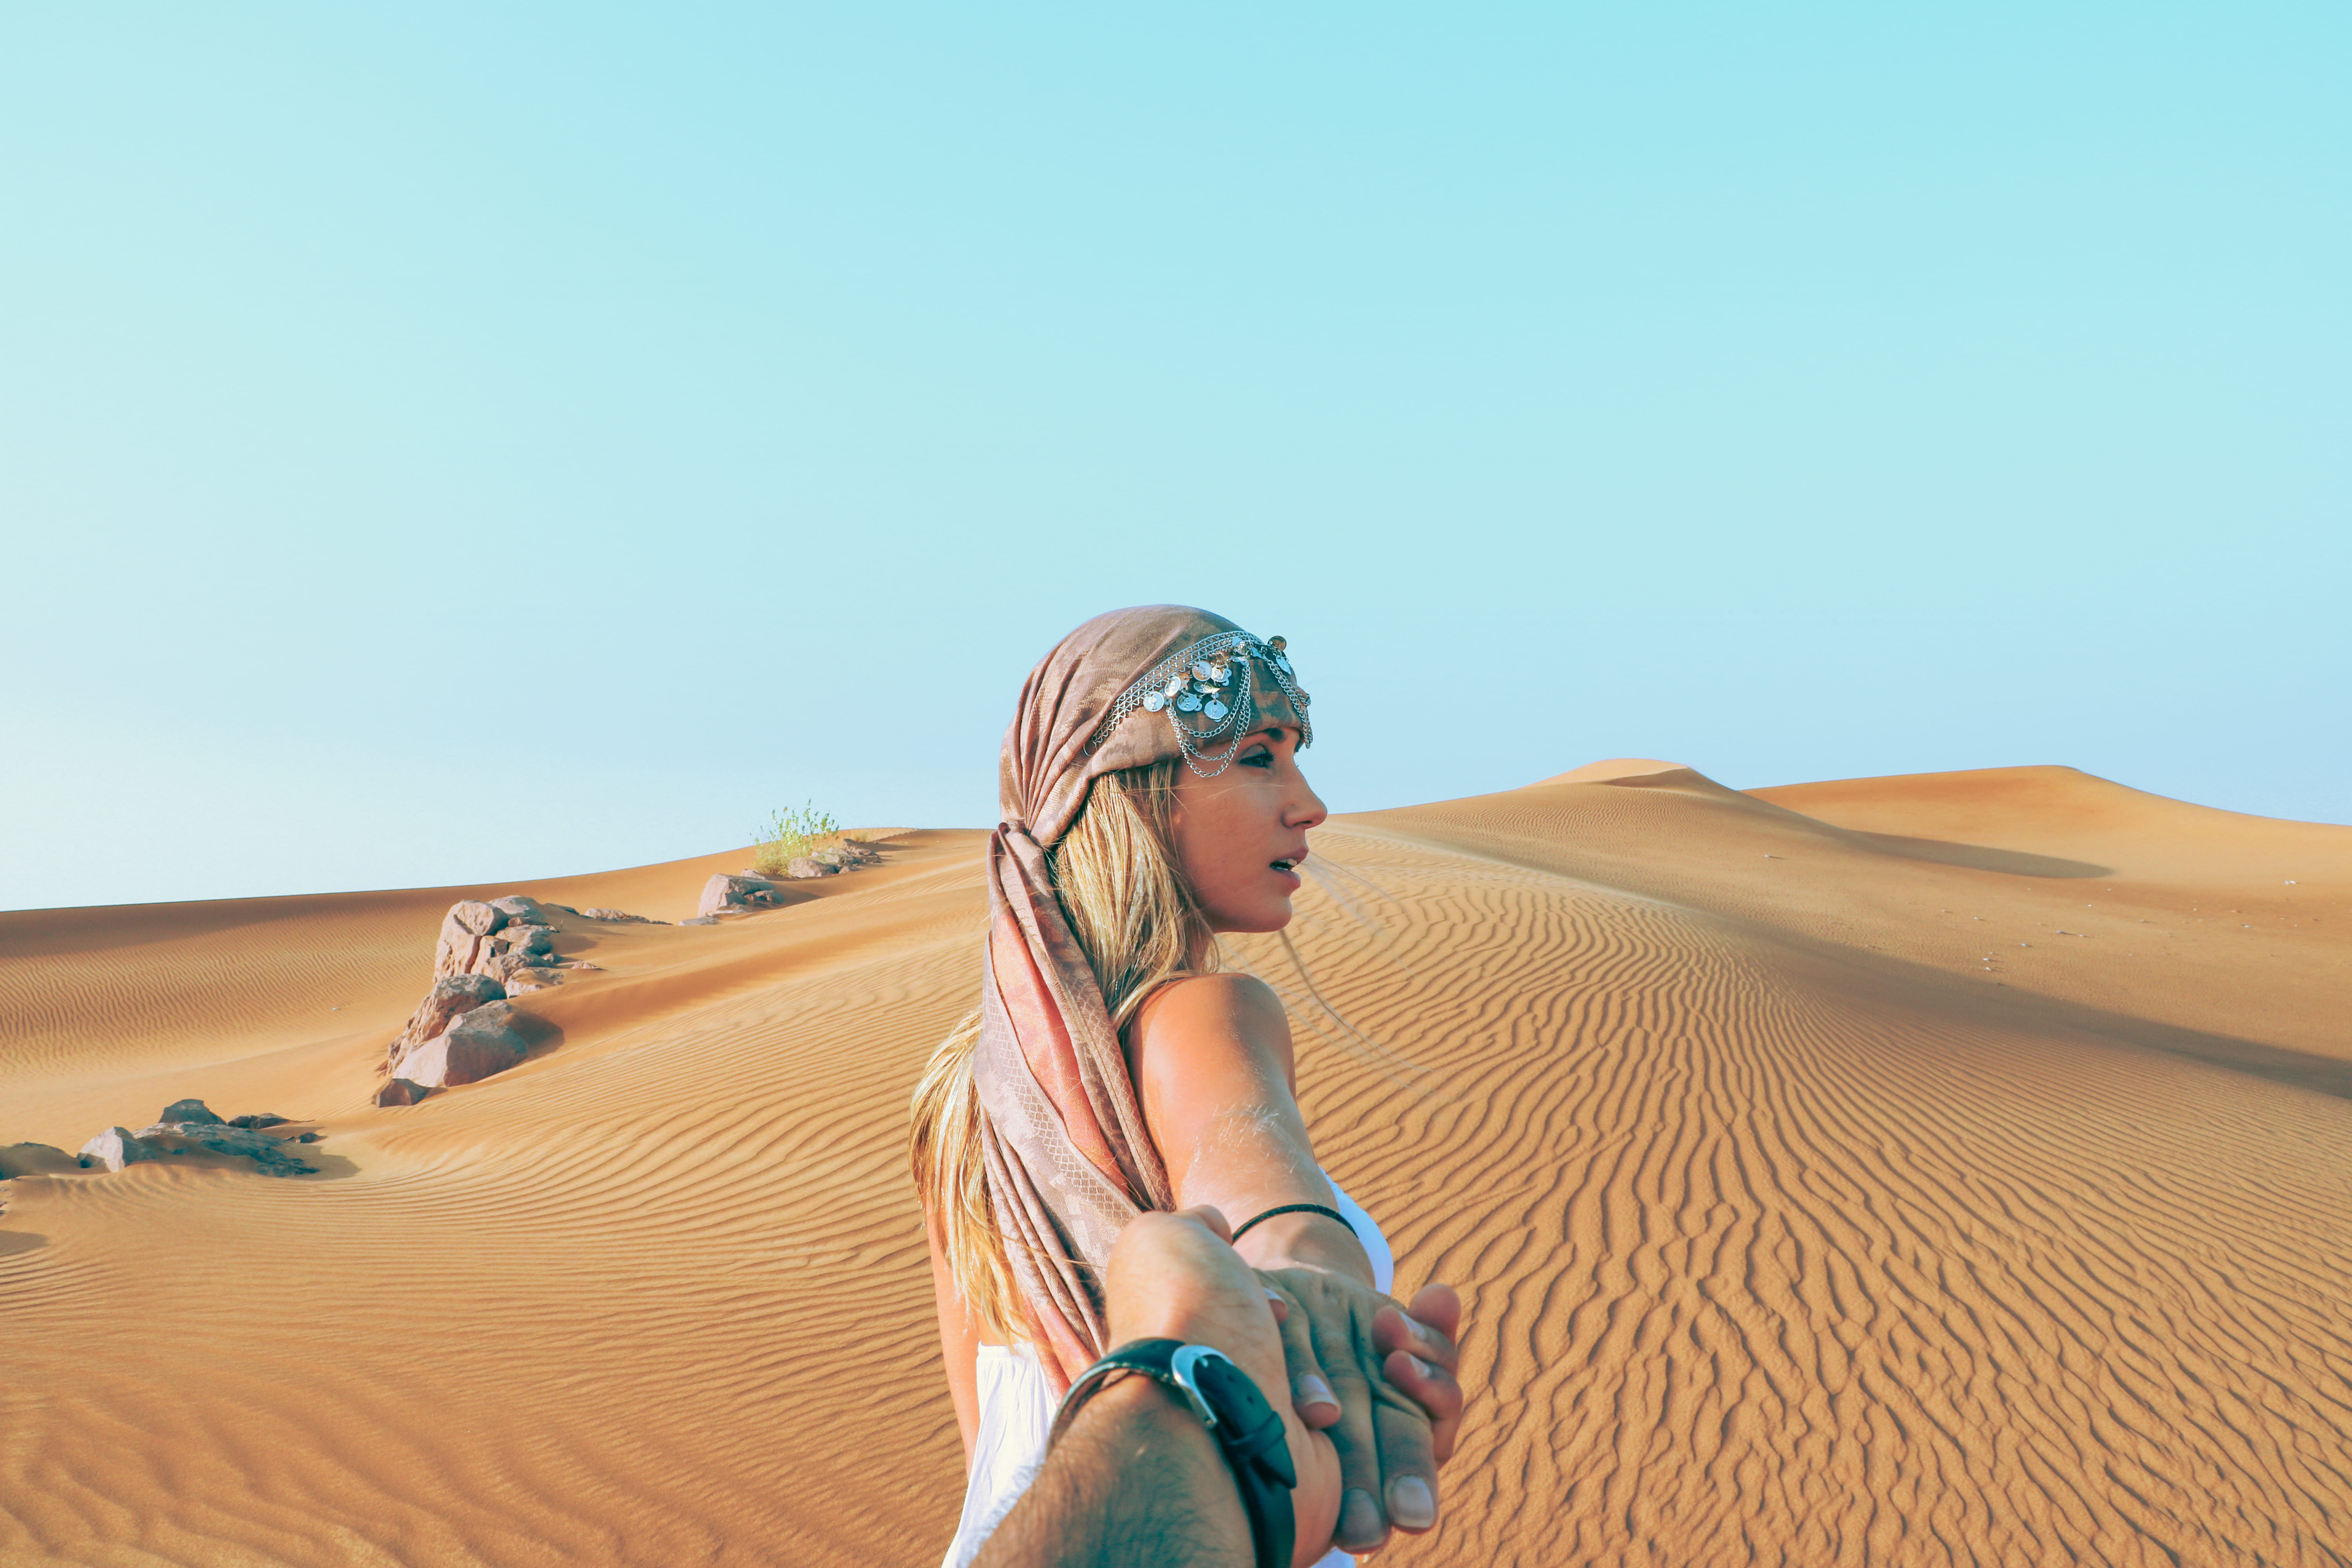 man and woman holding hands while in desert, relationship goals on desert